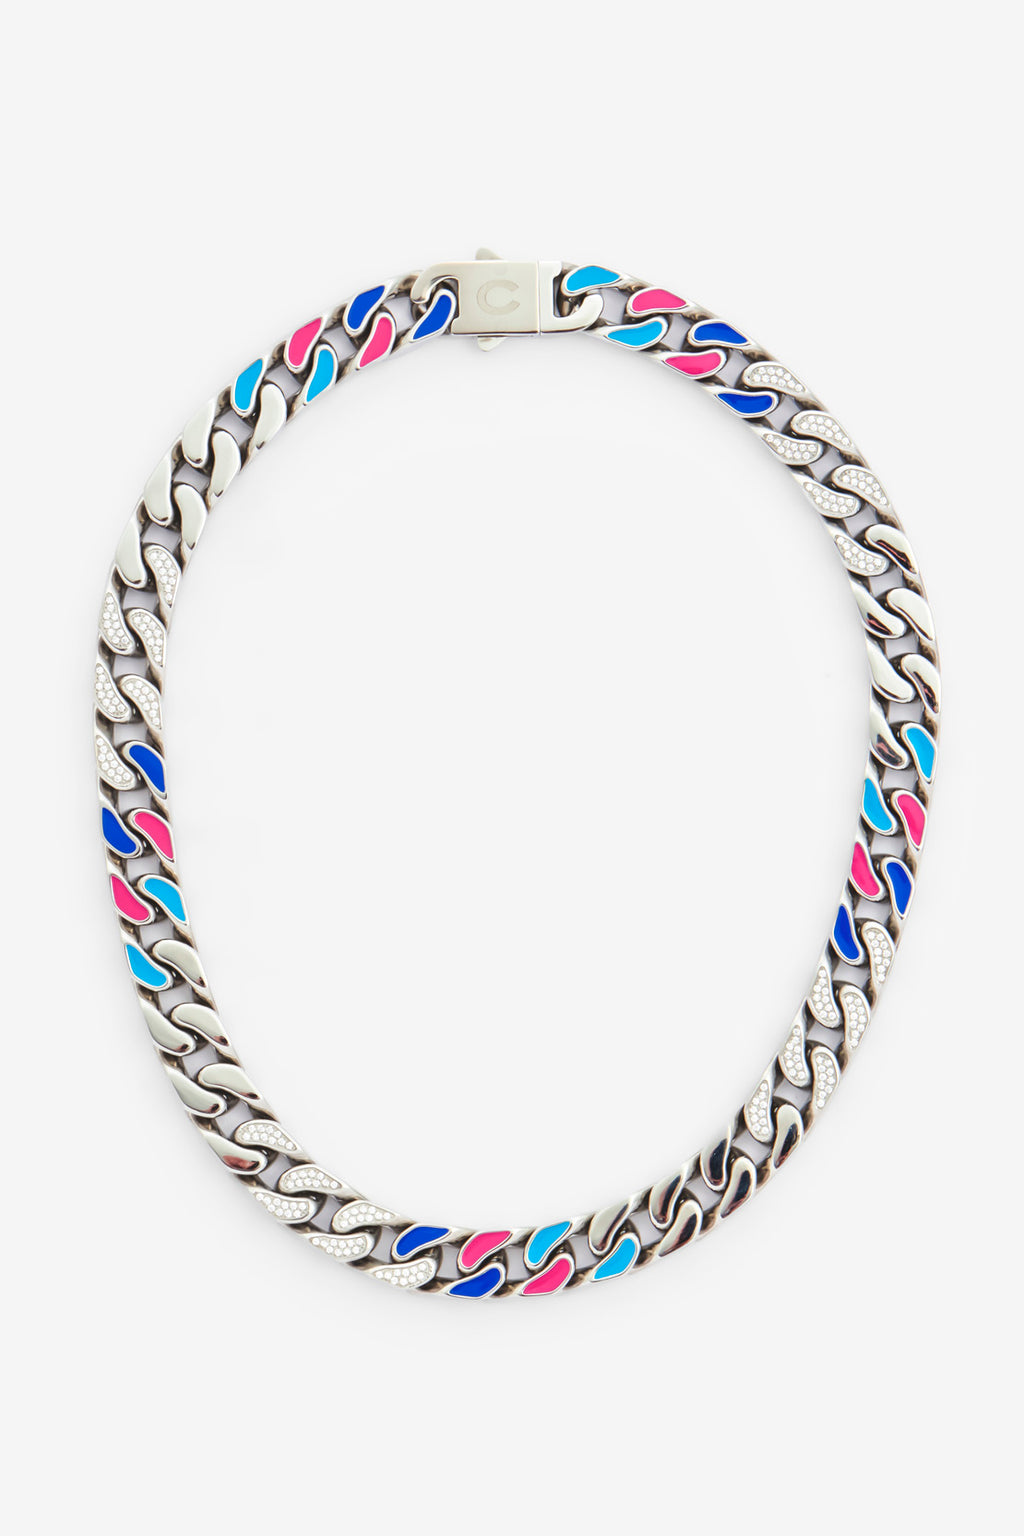 Louis Vuitton Cuban Chain Necklace Blue in Metal/Enamel with